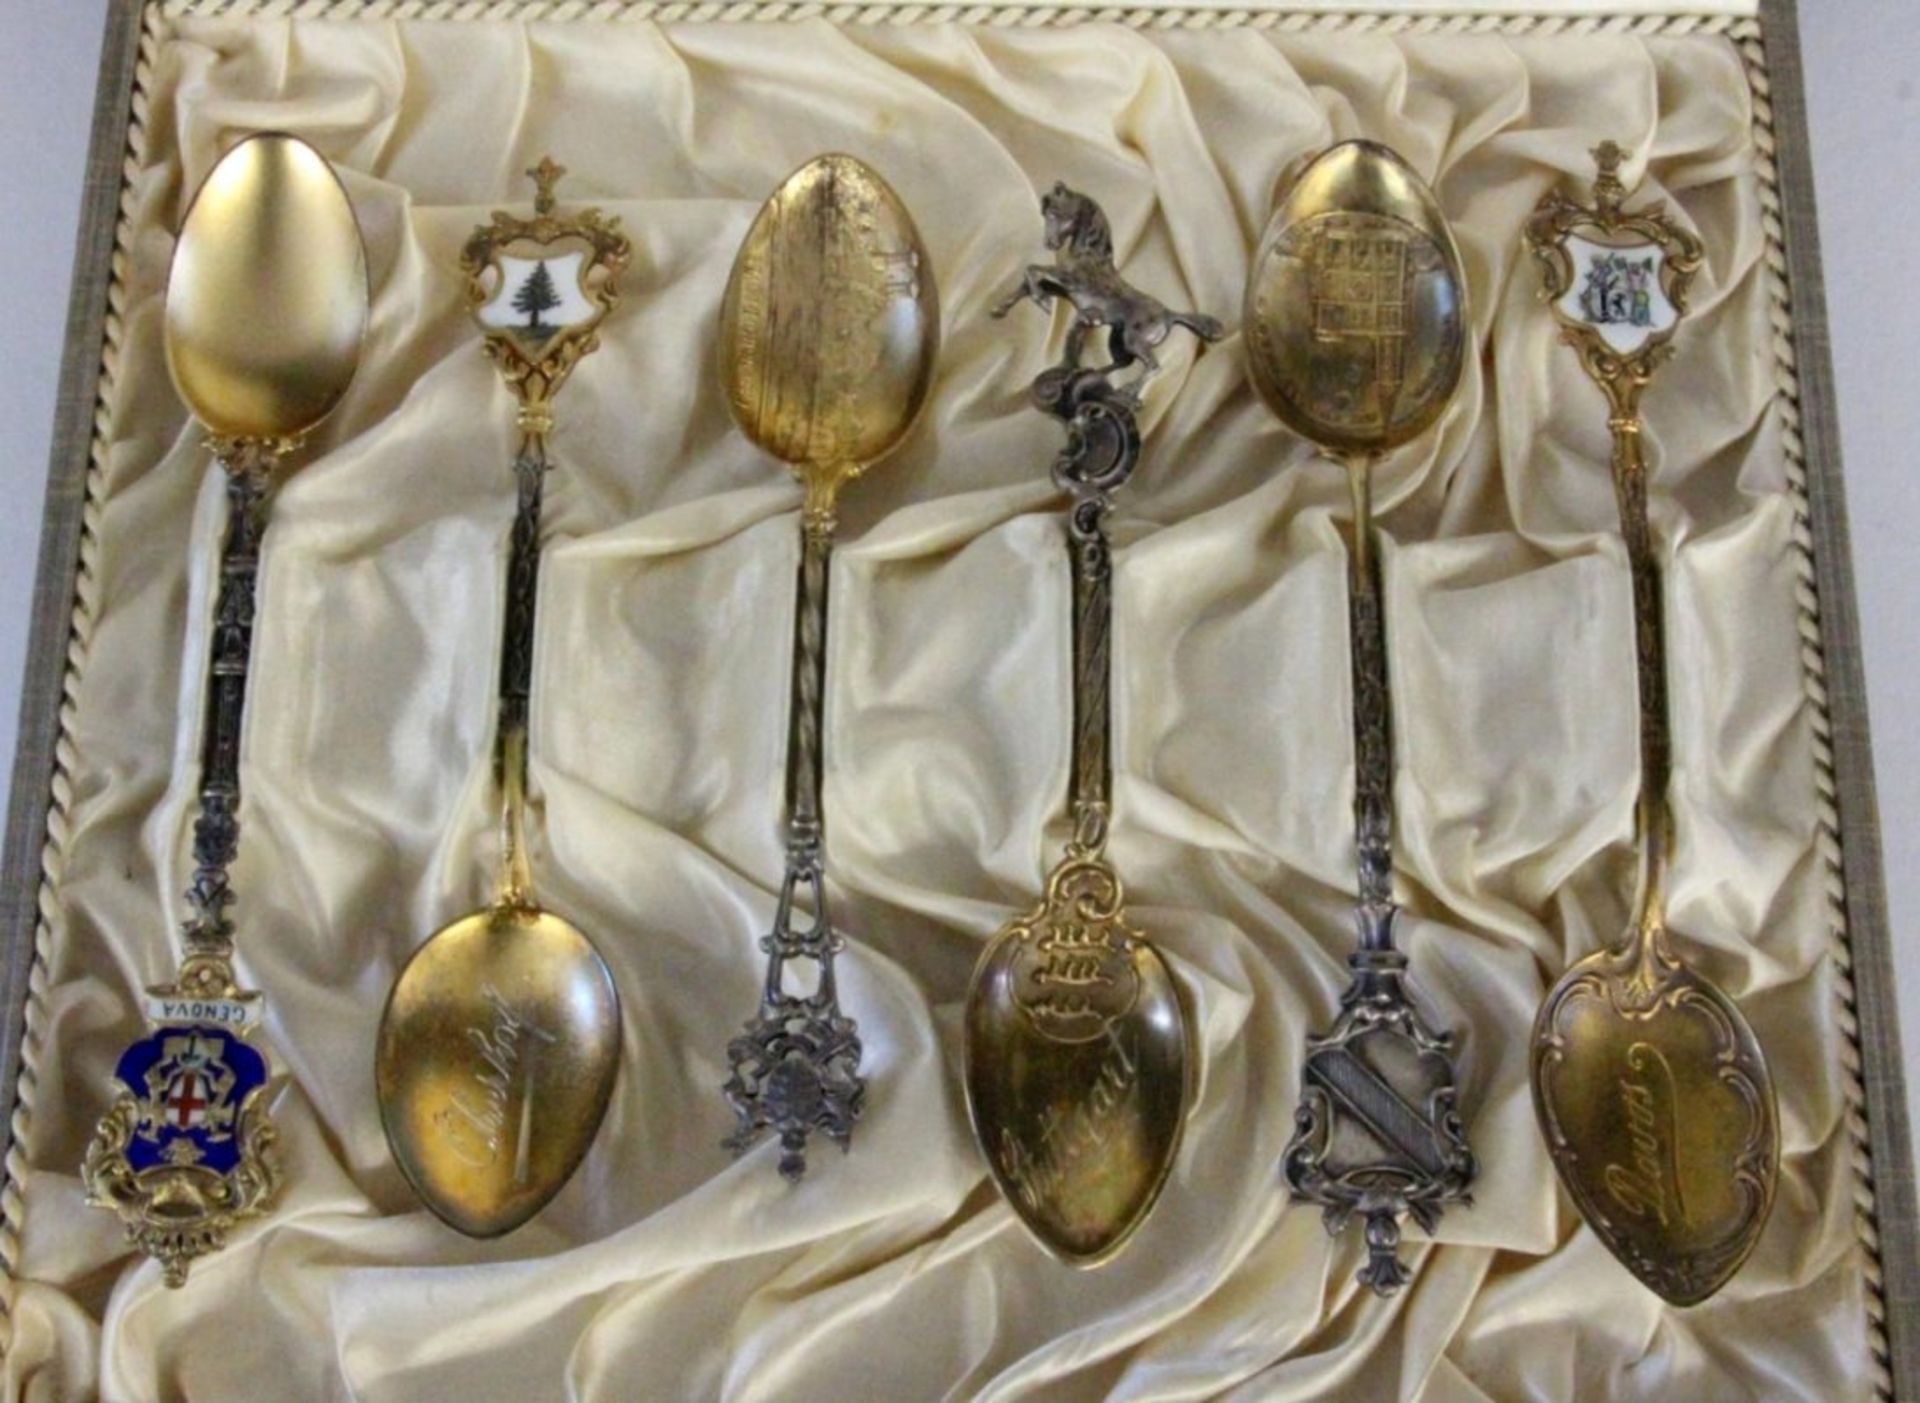 SIX SOUVENIR SPOONS Silver, partly gilded and partly with an enamelled coat of arms.